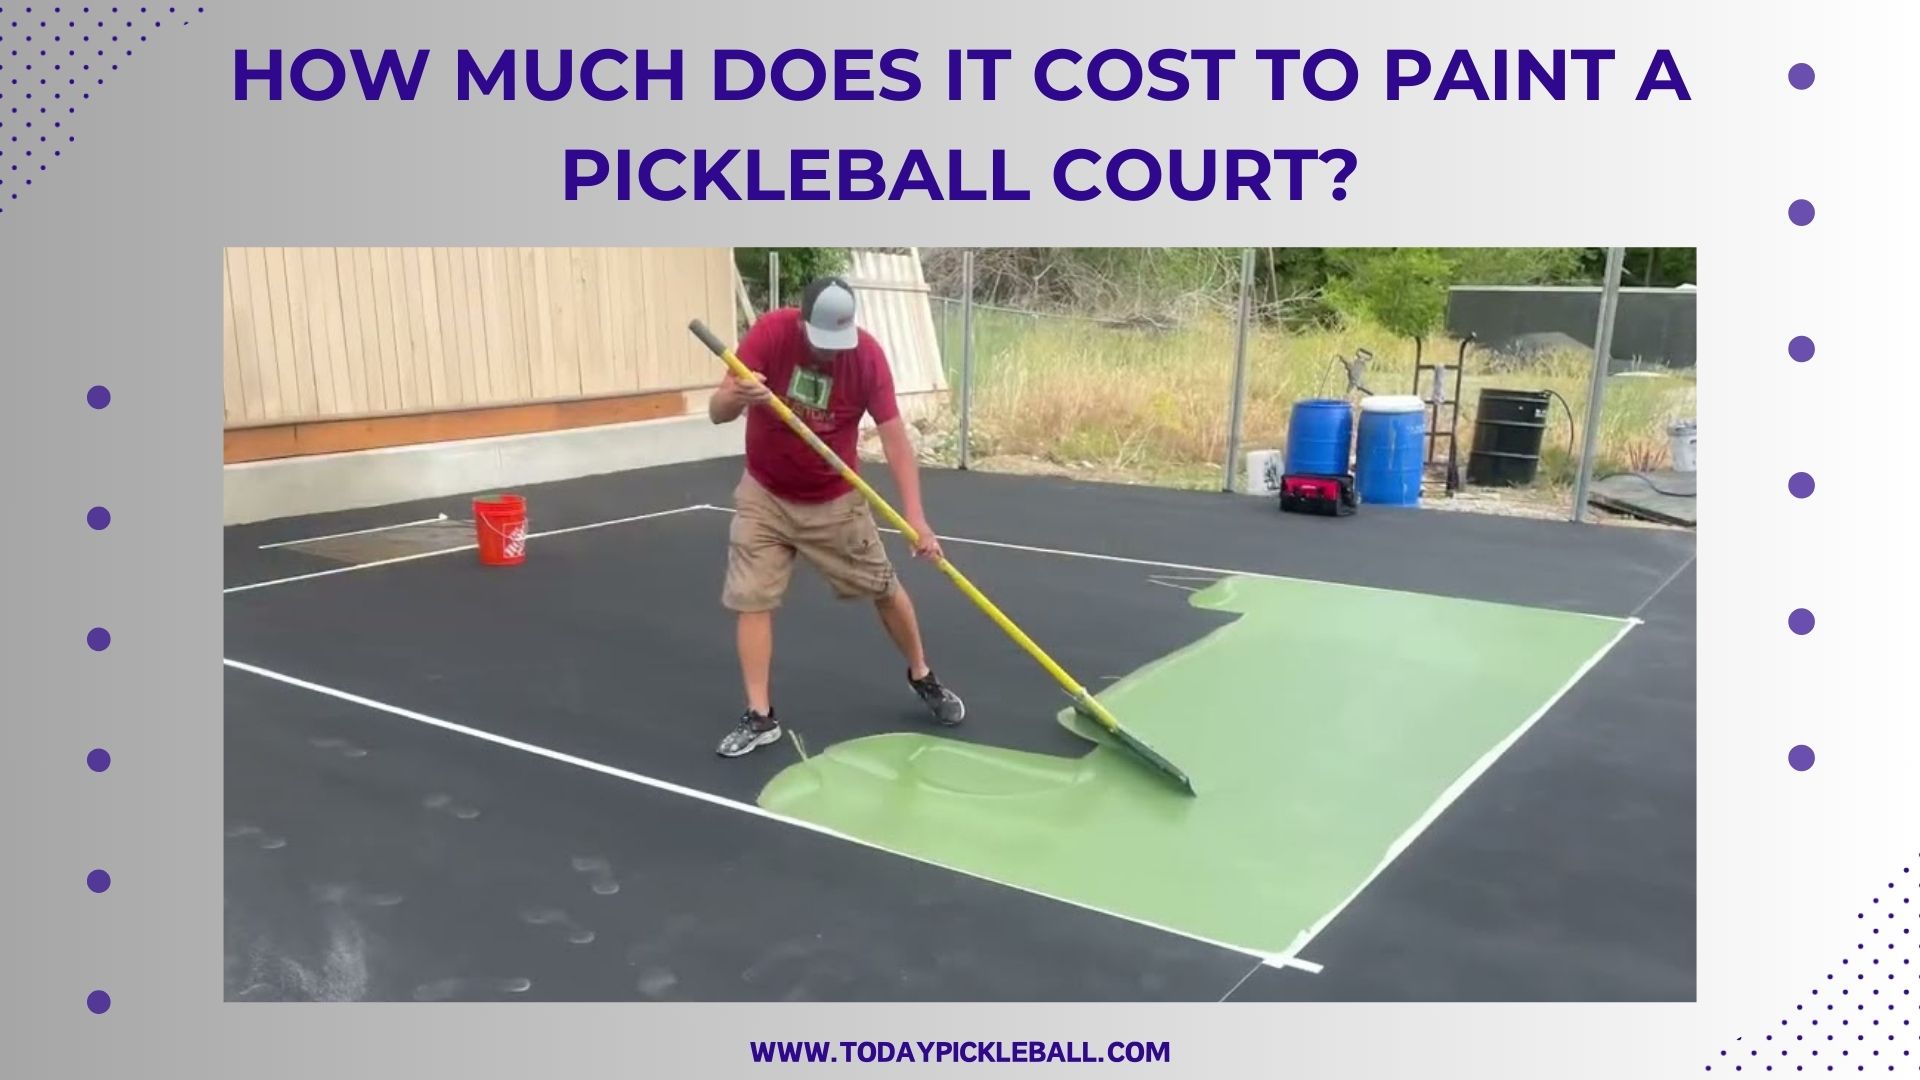 here is the image of a man painting his court to guide you as well How Much Does It Cost to Paint a Pickleball Court?